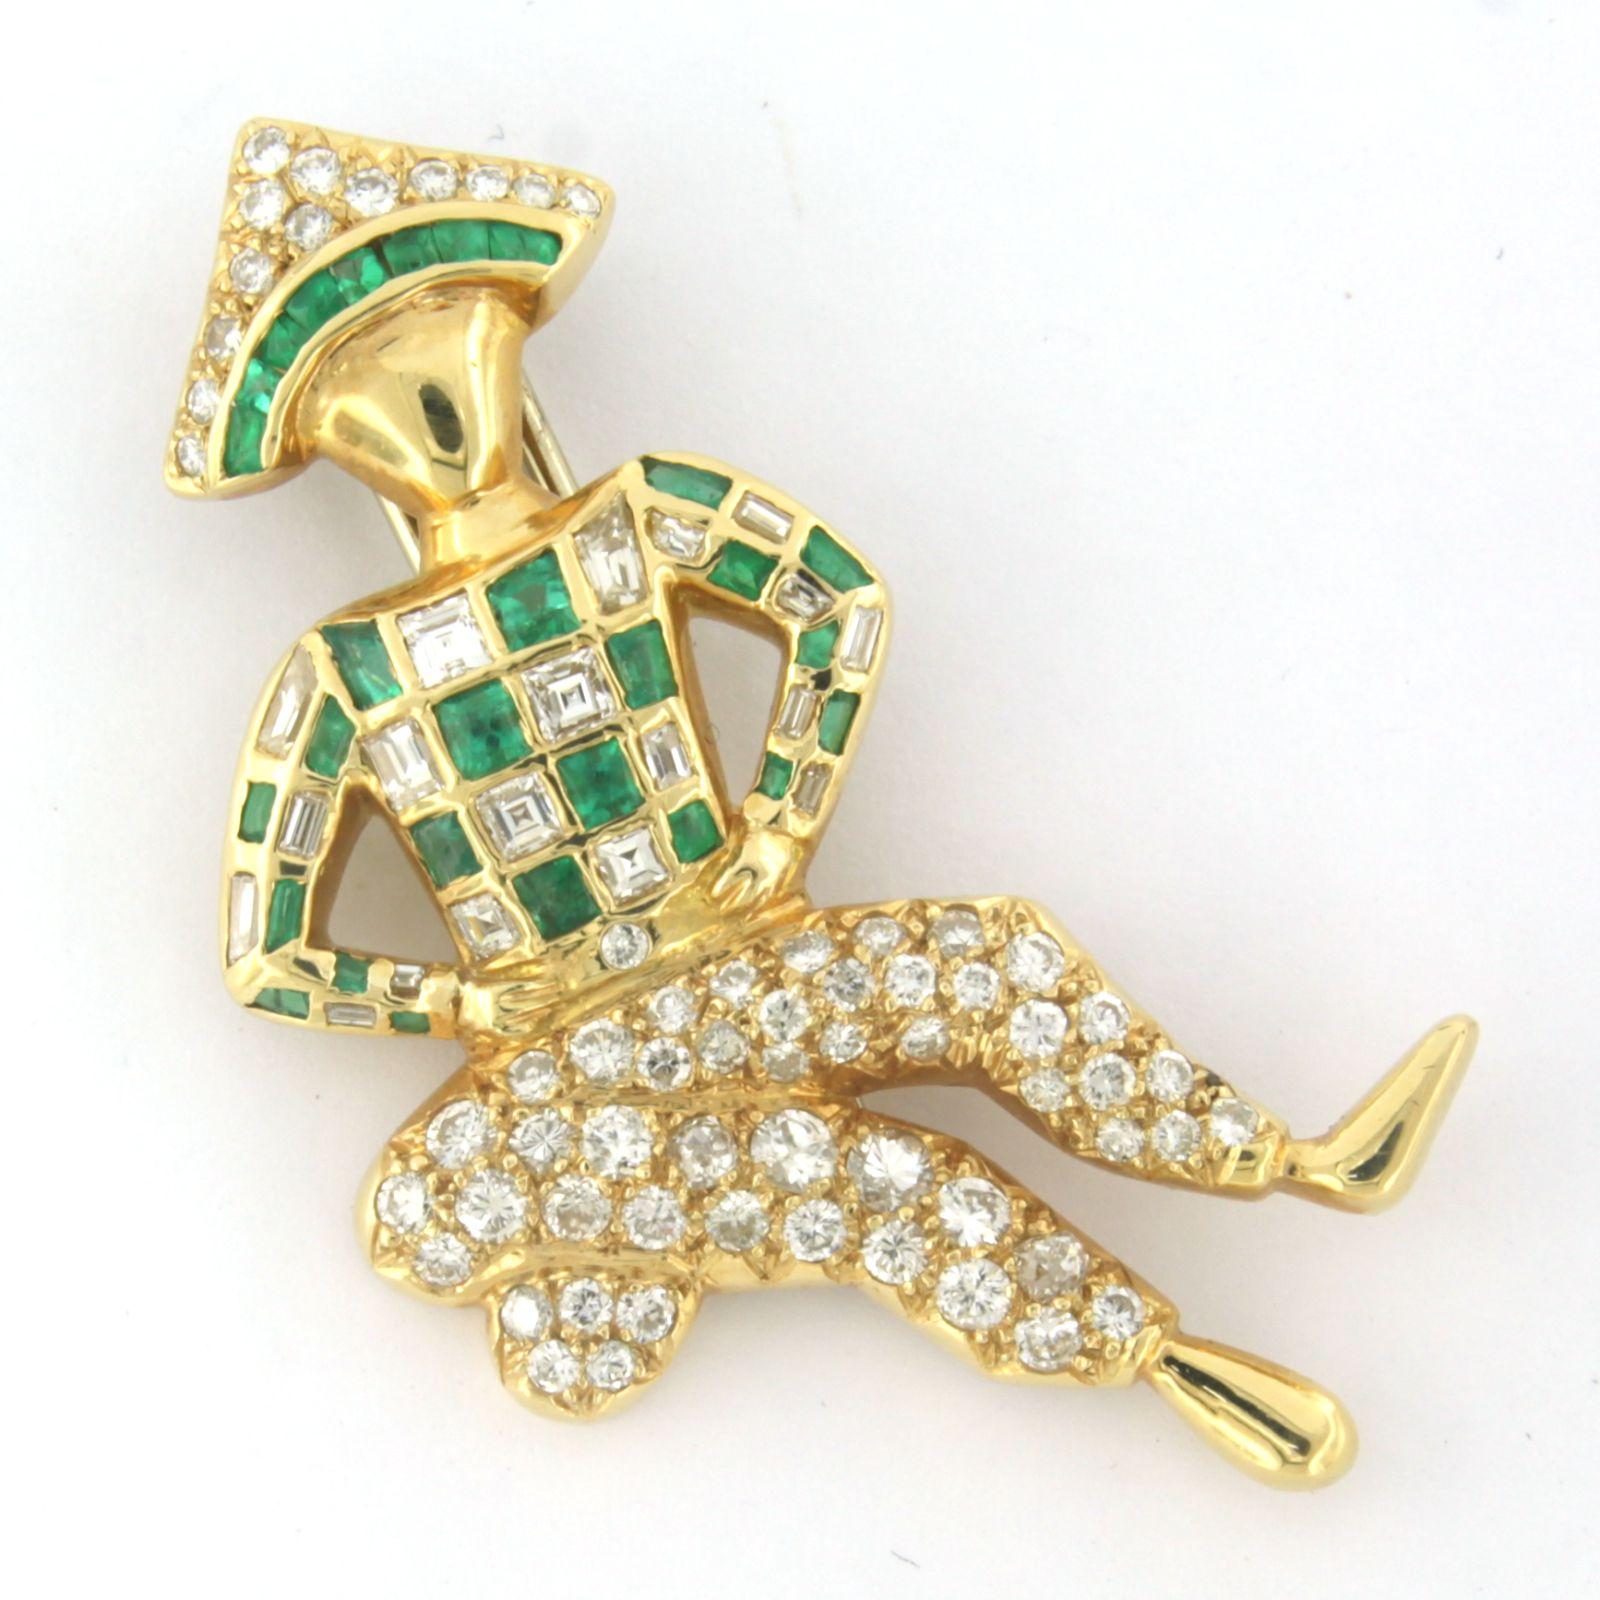 18k yellow gold broche set with emerald and baguette and brilliant cut diamonds 2.00ct - F/G - VS/SI

Detailed description:

The brooche is 4.7 cm long by 3.0 cm wide

weight 11.0 grams

Set with

- 28 x 1.5 mm x 1.5 mm baguette cut olied